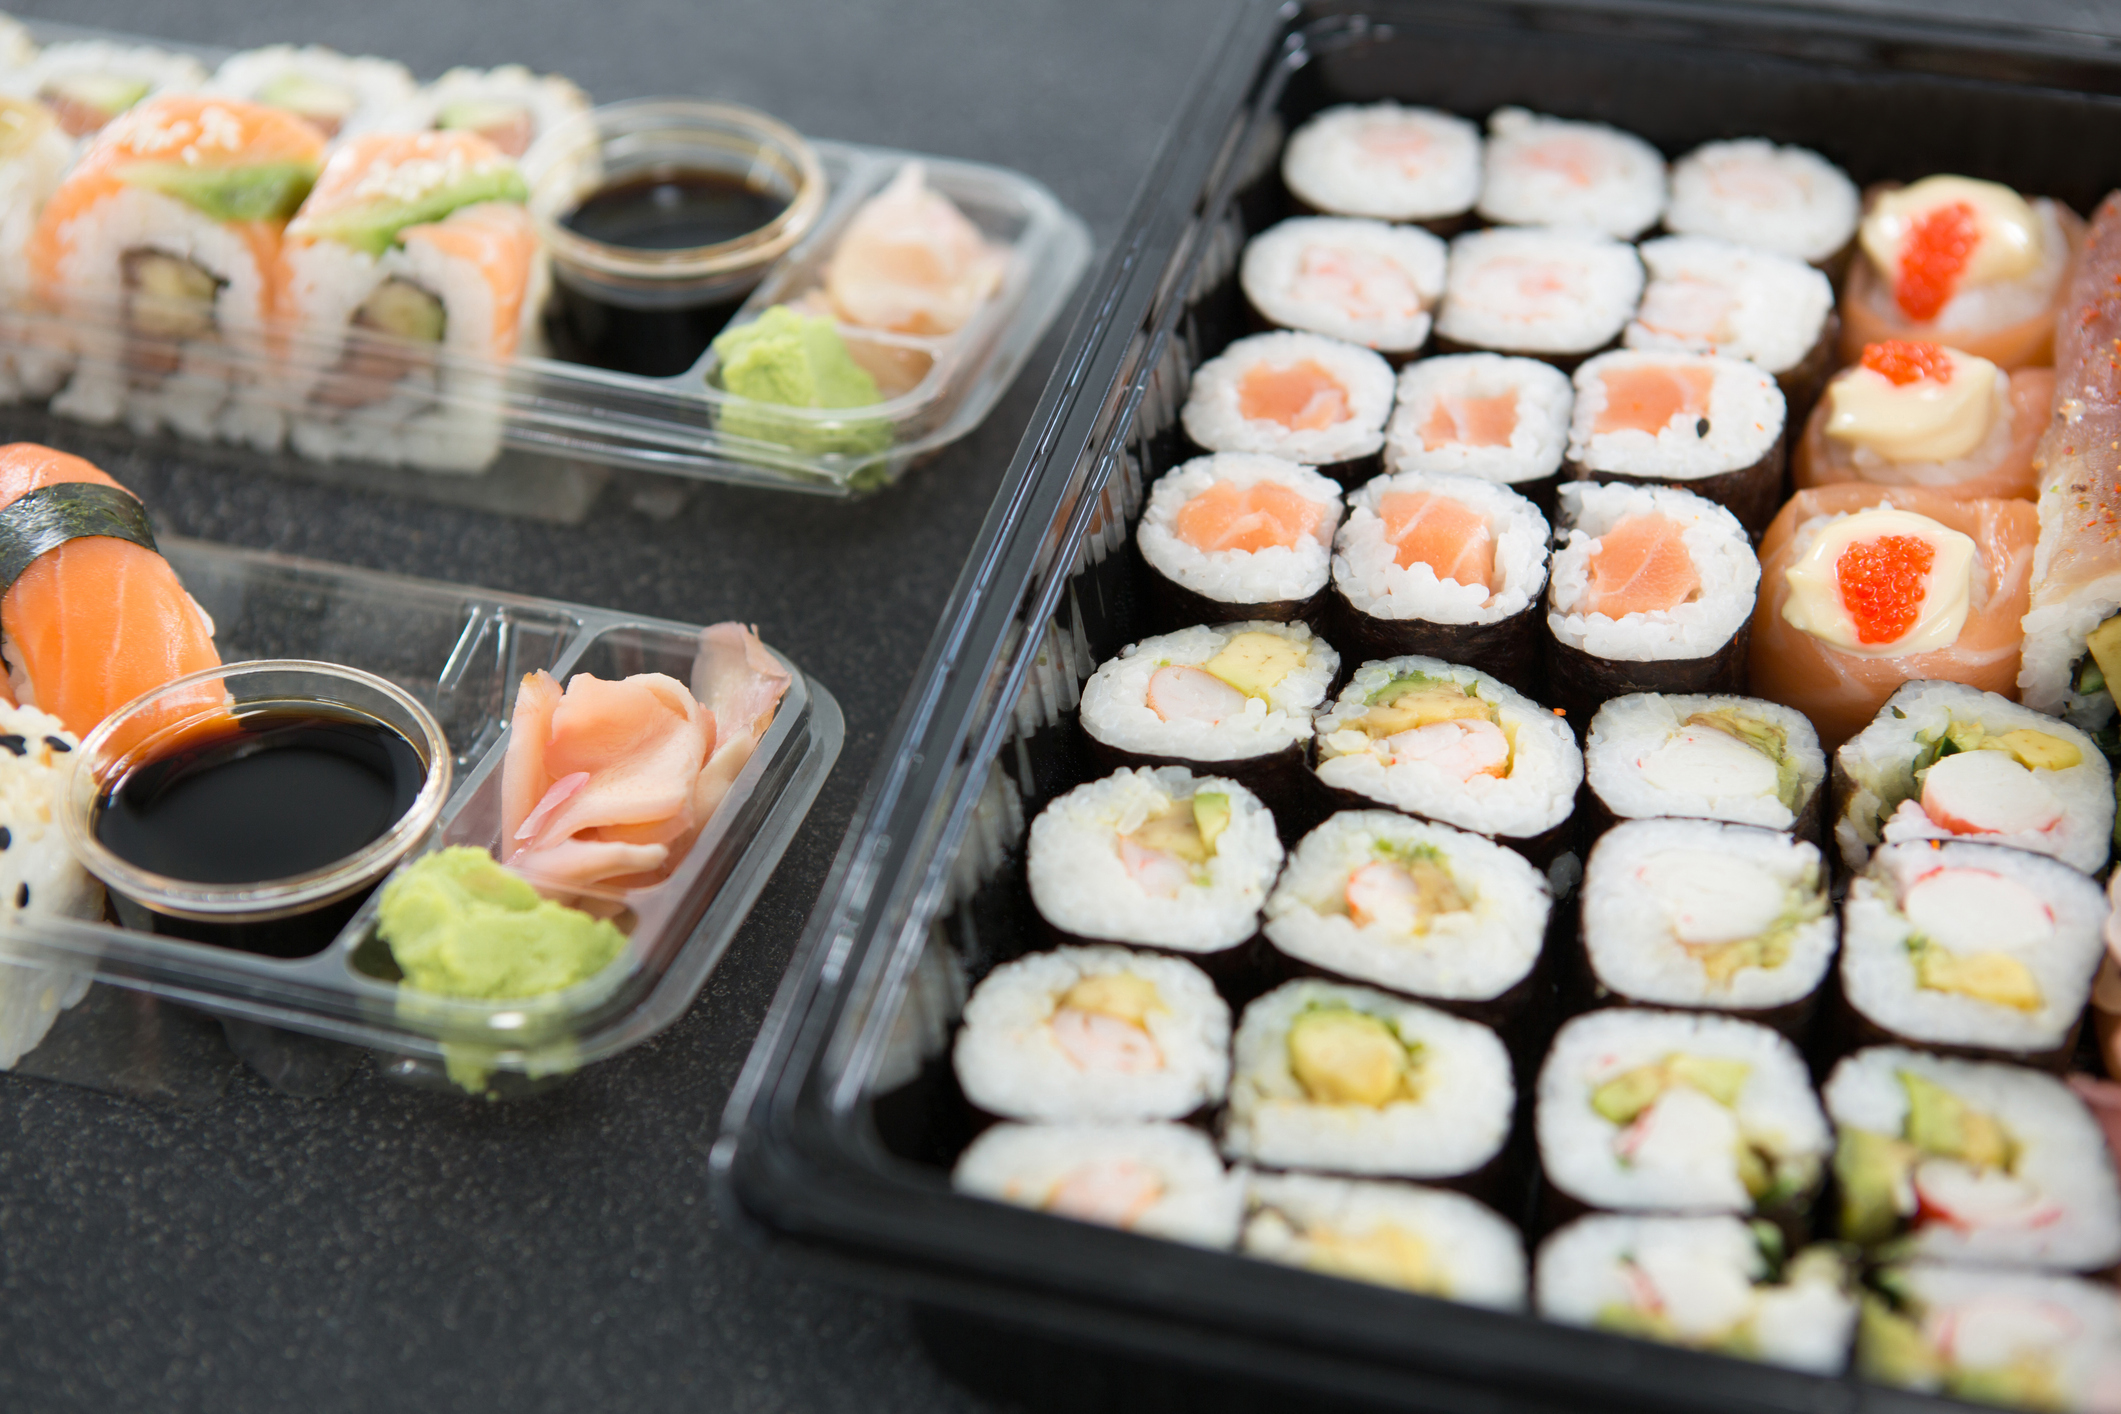 This Japanese Microwave Hack Claims To Bring Your Store Bought Sushi Back To Life